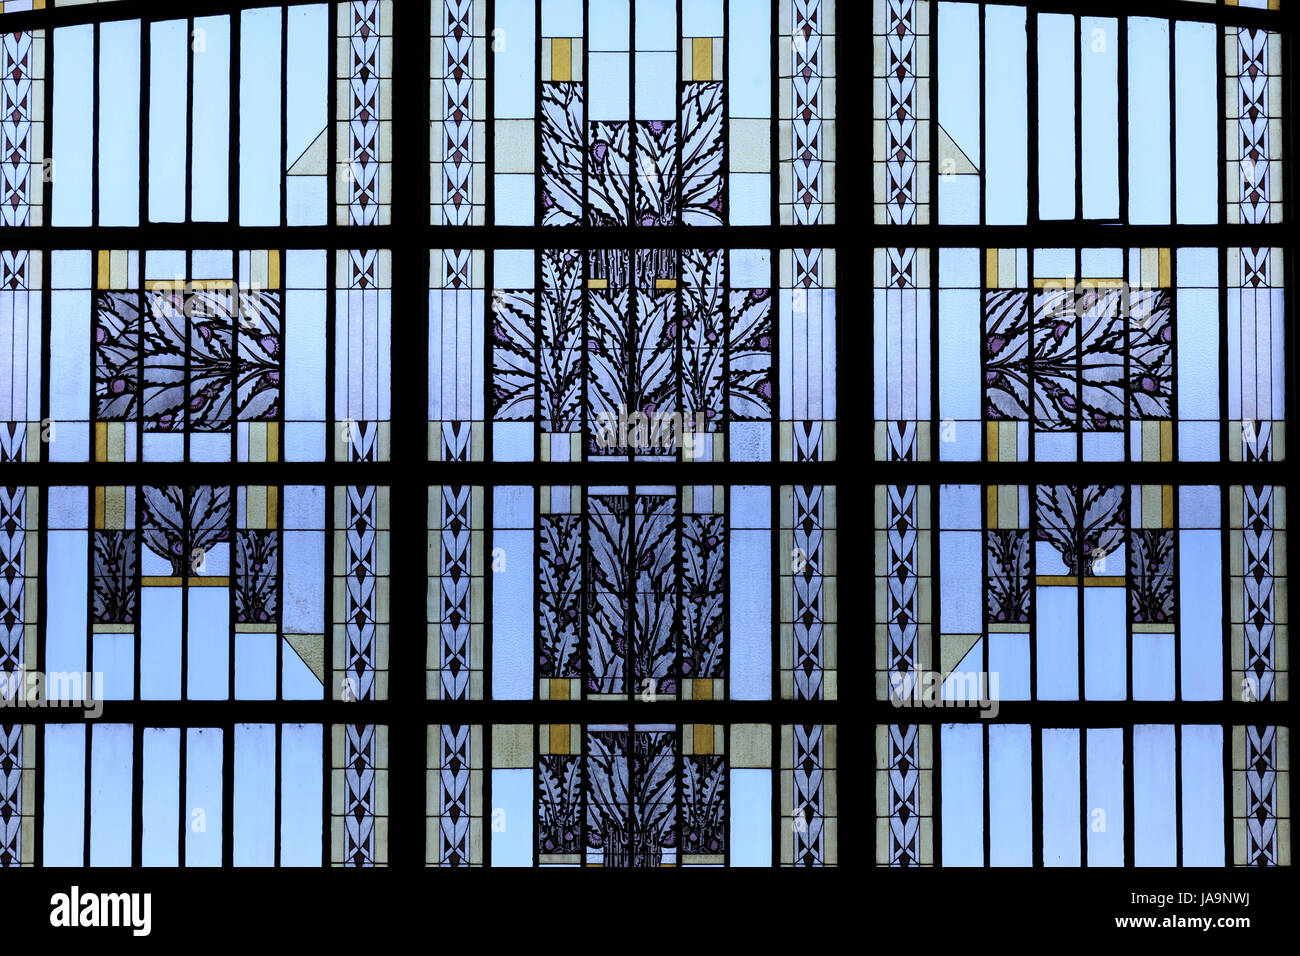 France, Haute Vienne, Limoges, Limoges Benedictins railway station, stained glass Stock Photo